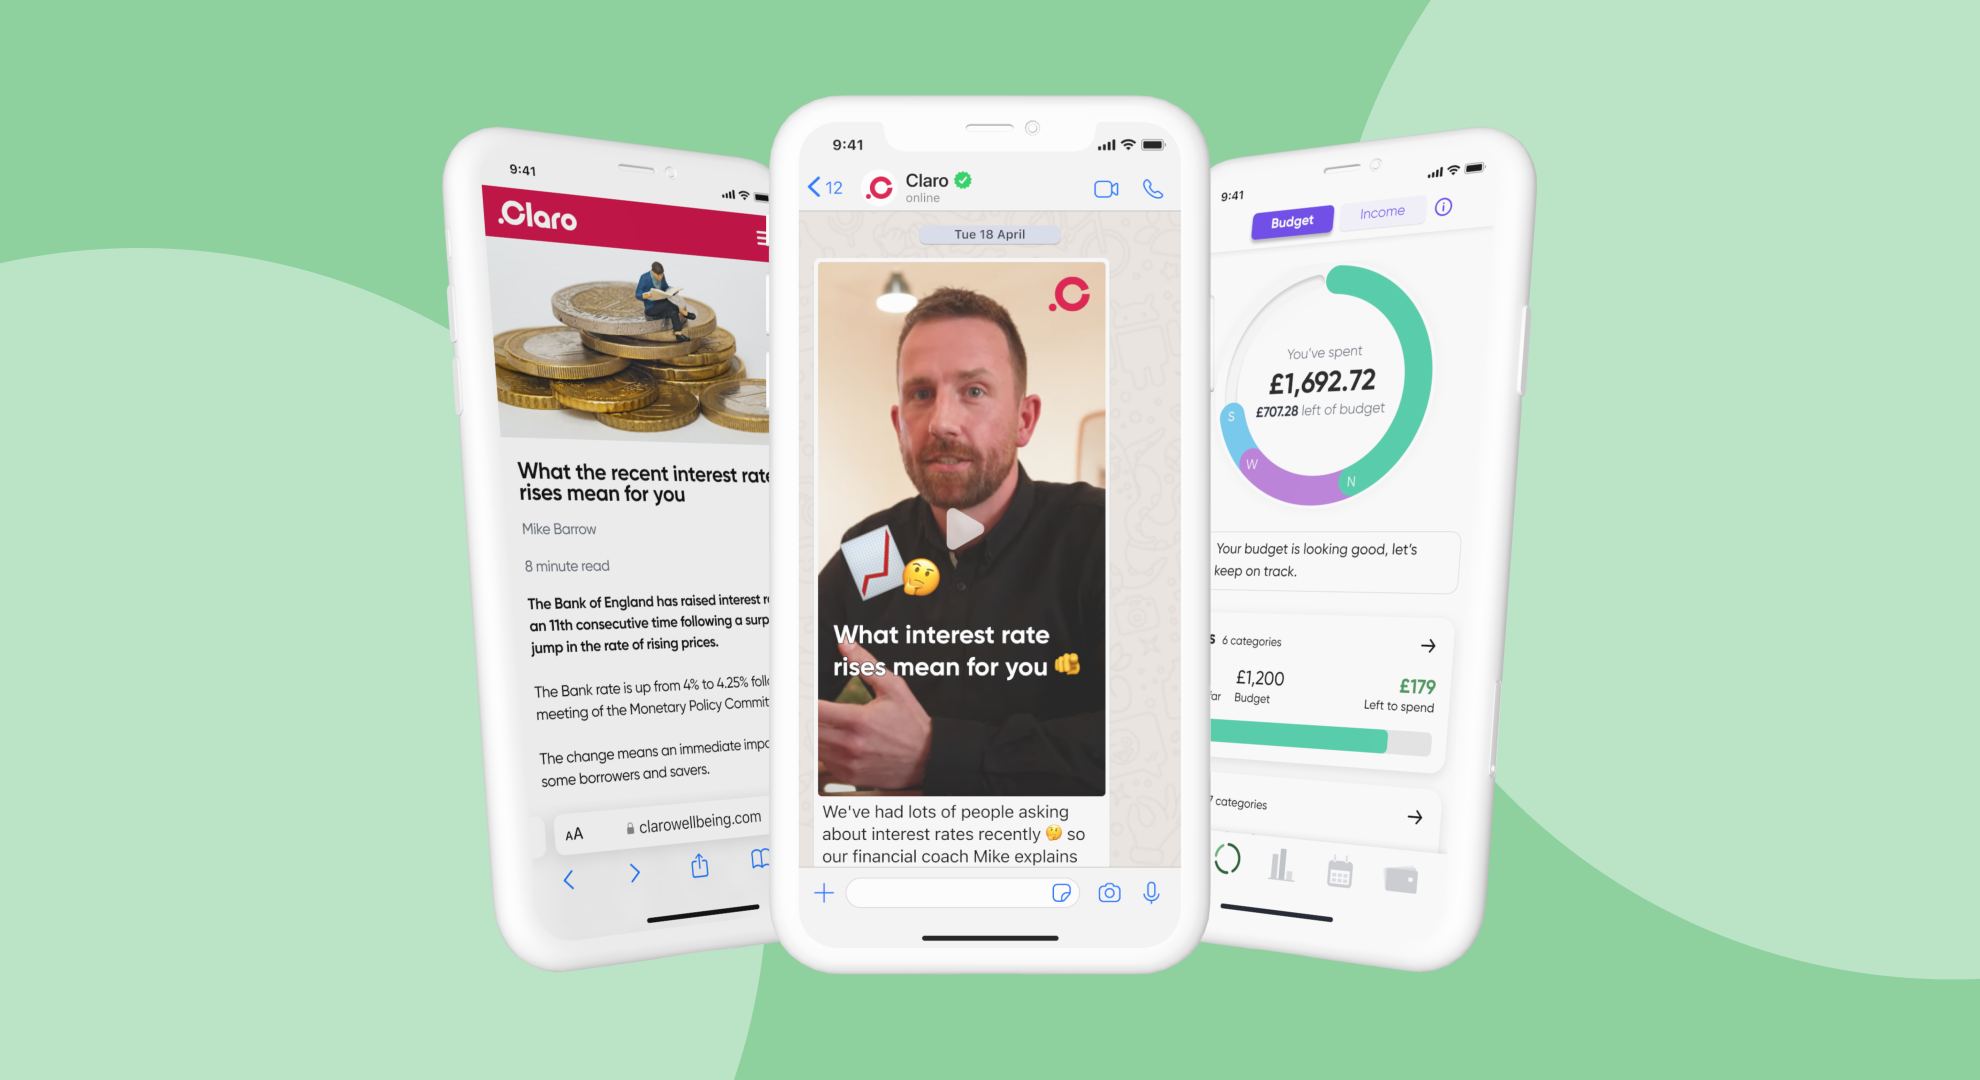 Introducing the new Claro Wellbeing – an update from our CEO